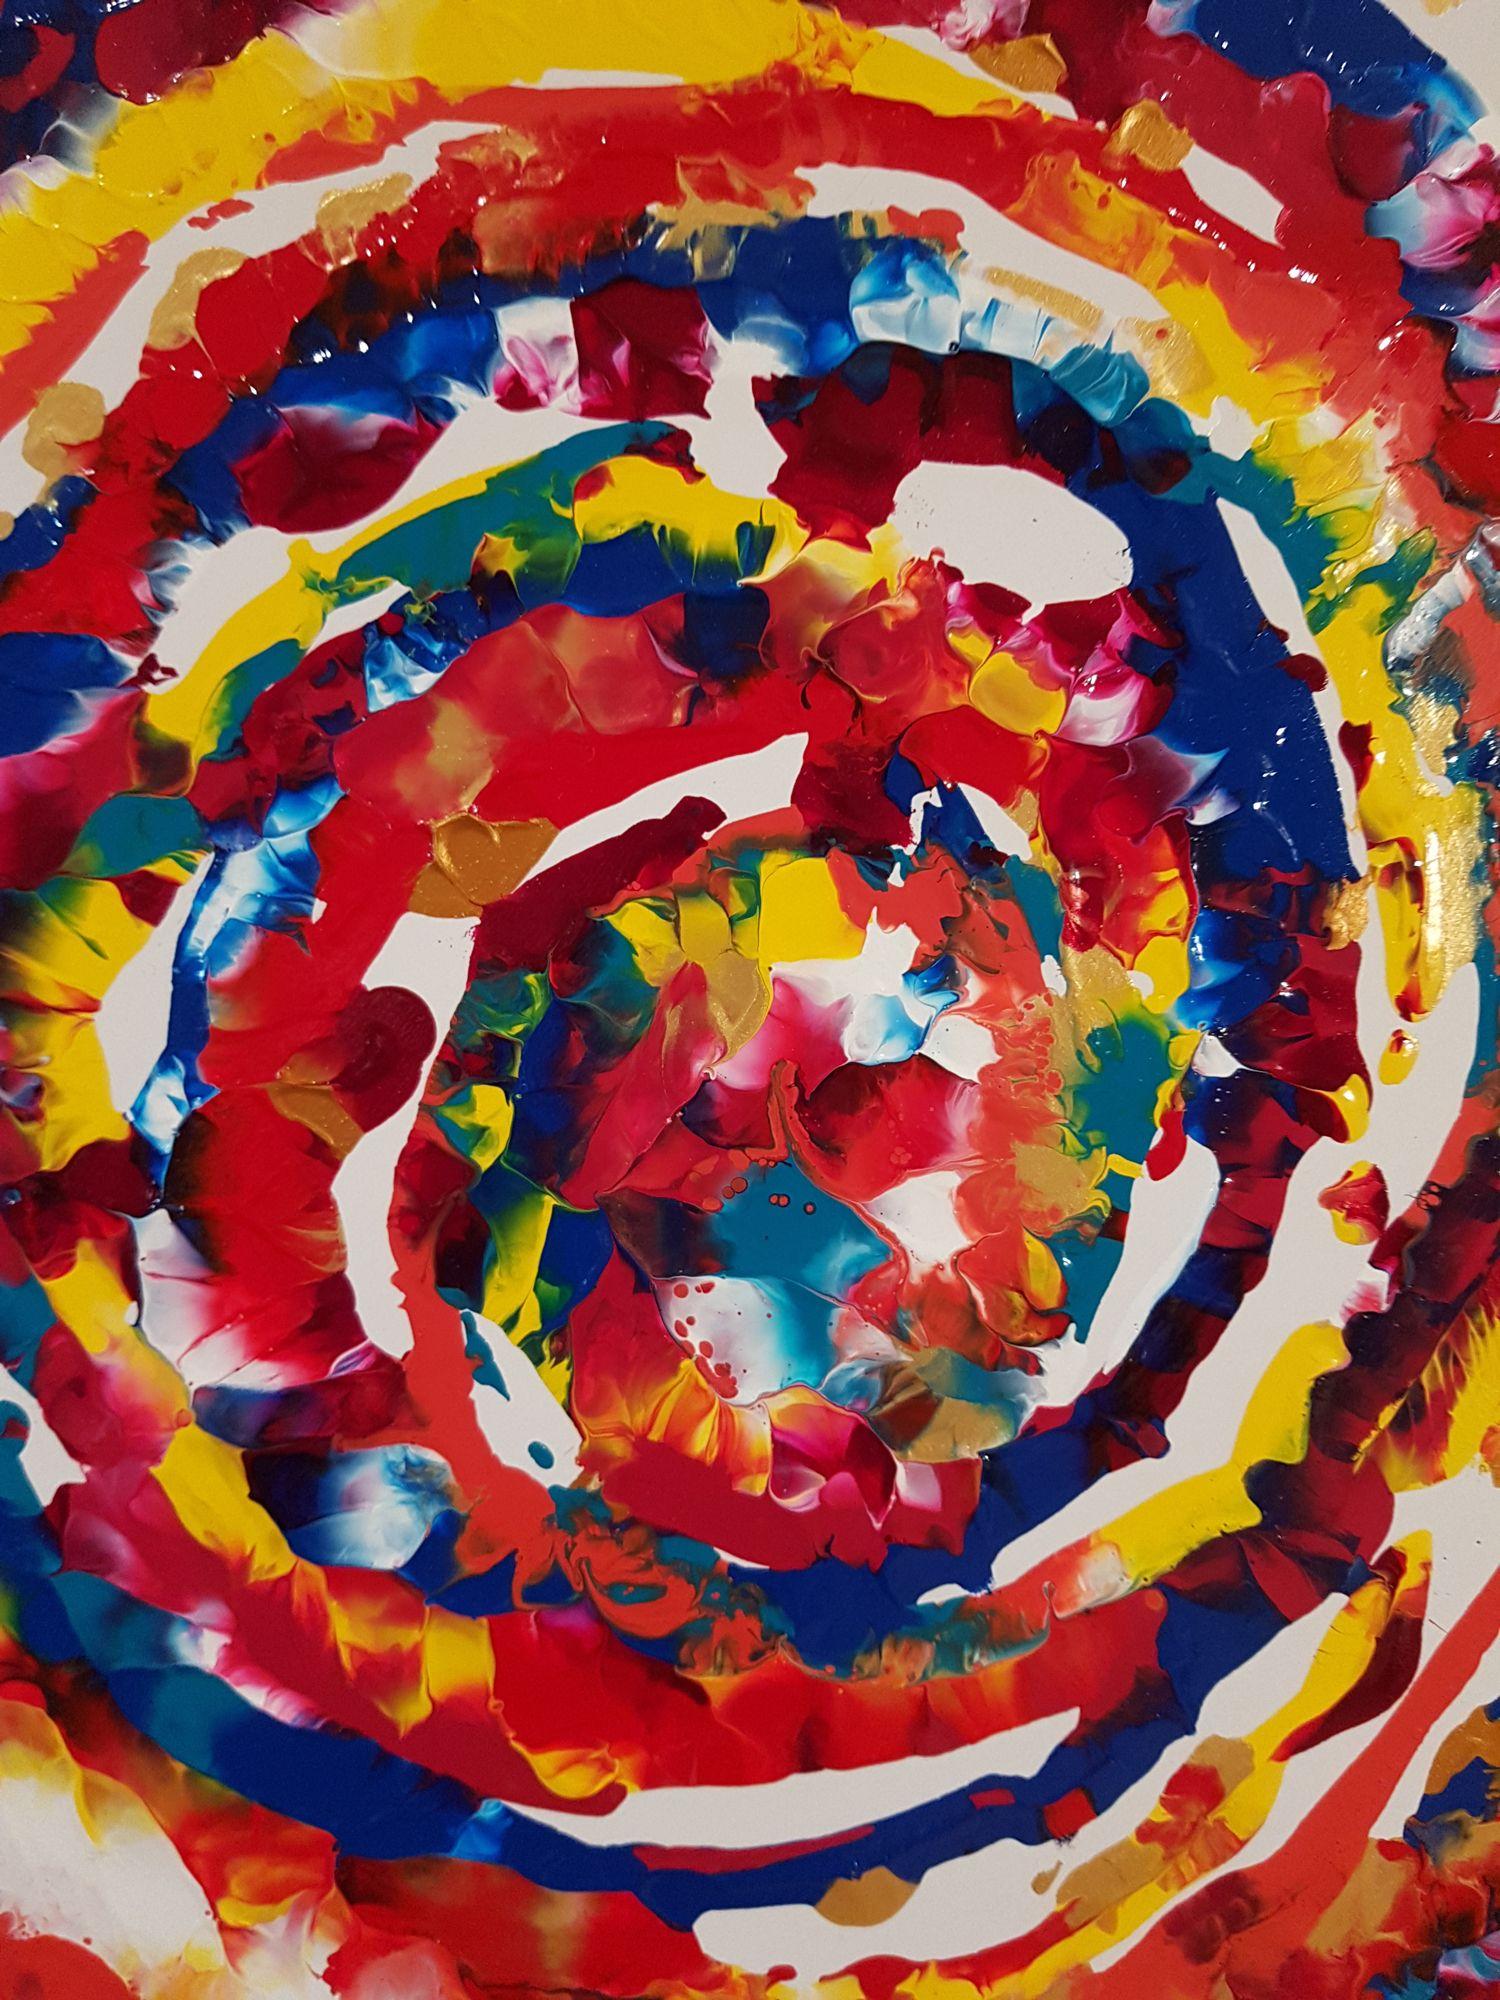 A beautiful vortex motion pattern appears in this abstract expressionism painting with vibrant red, yellow, salmon pink, orange, dark blue, refreshing turquoise, light pale gold, and deep iridescent gold. The negative space is created by painting